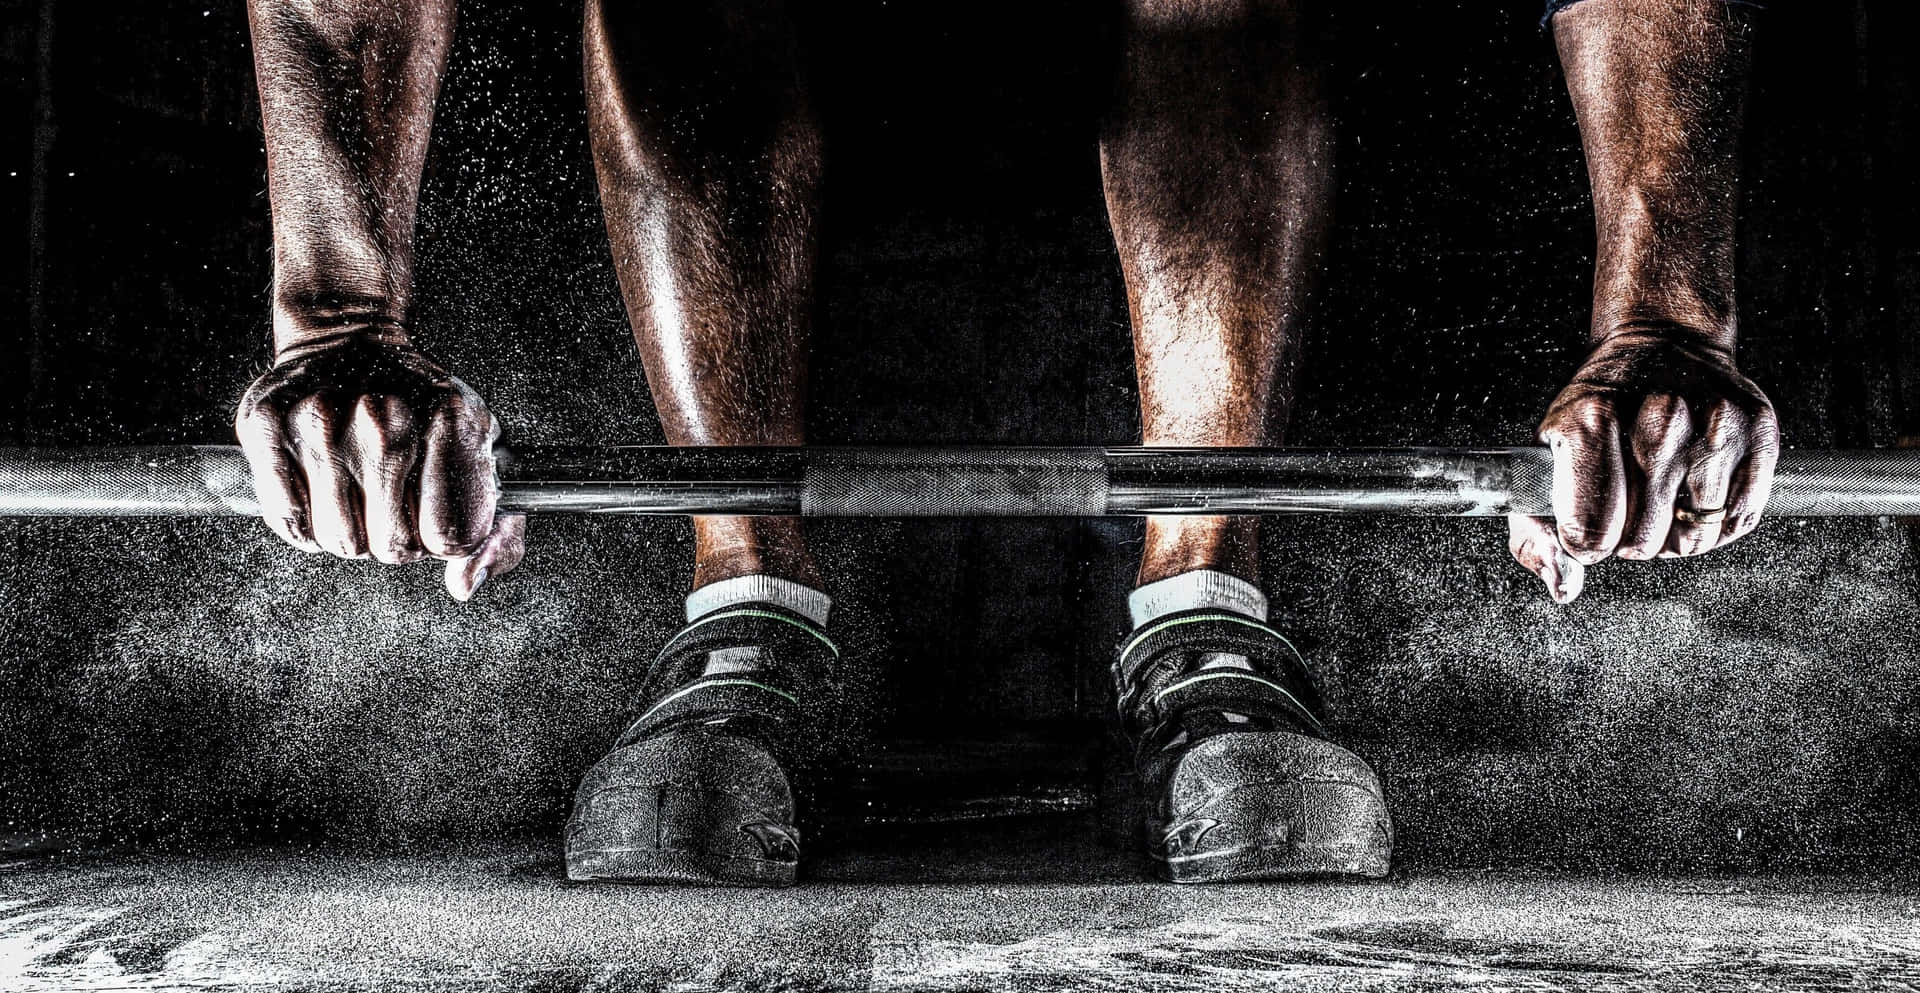 Weightlifting Preparation Gripand Stance Wallpaper